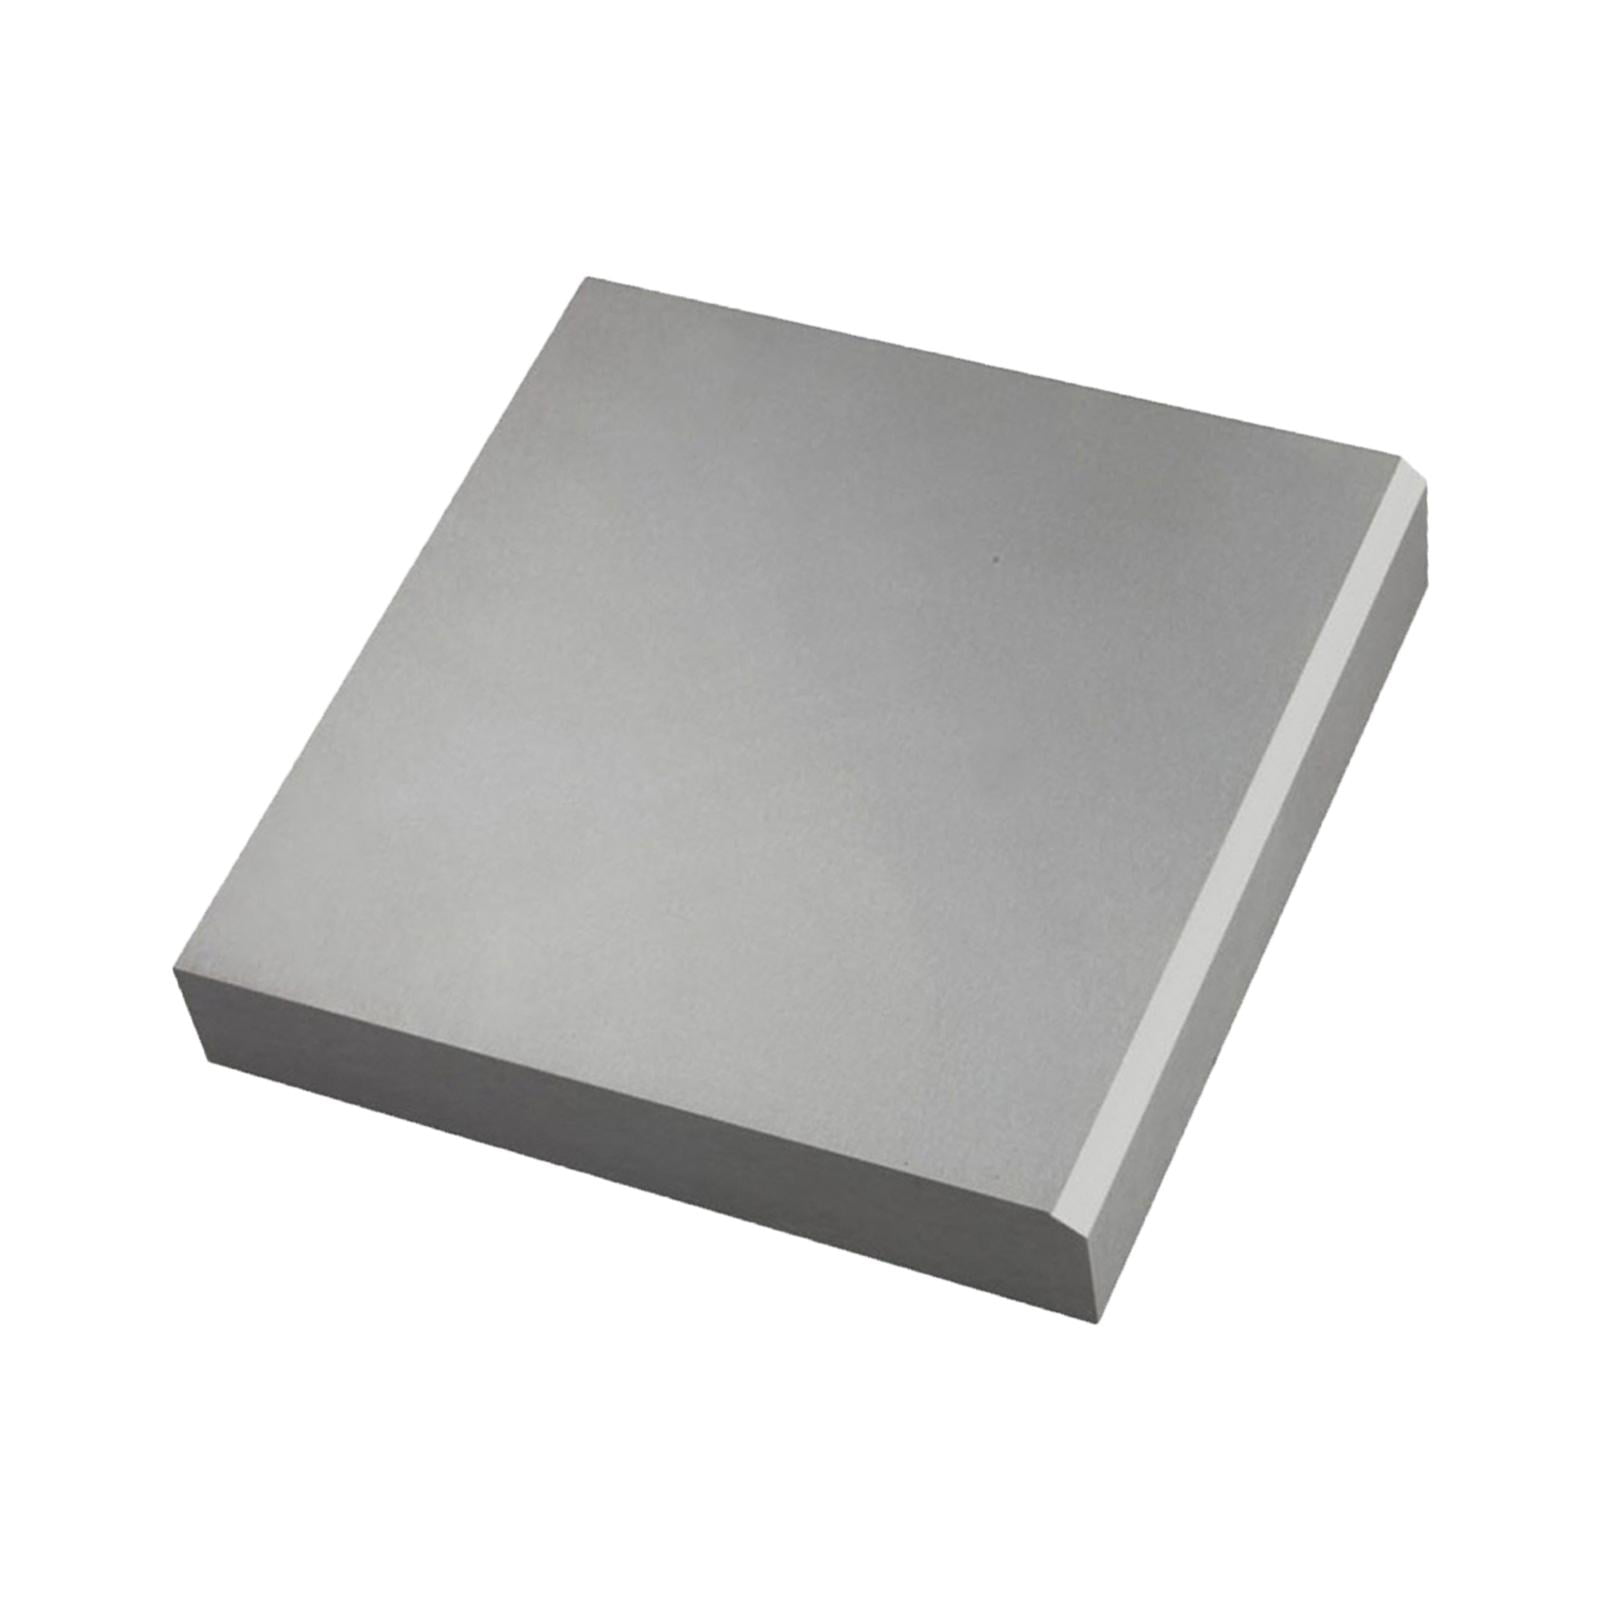 Steel BENCH BLOCK, 2 1/2, 4 or 6 Square Steel Block with Rubber Base,  Metal Forming Jewelry Making Tool